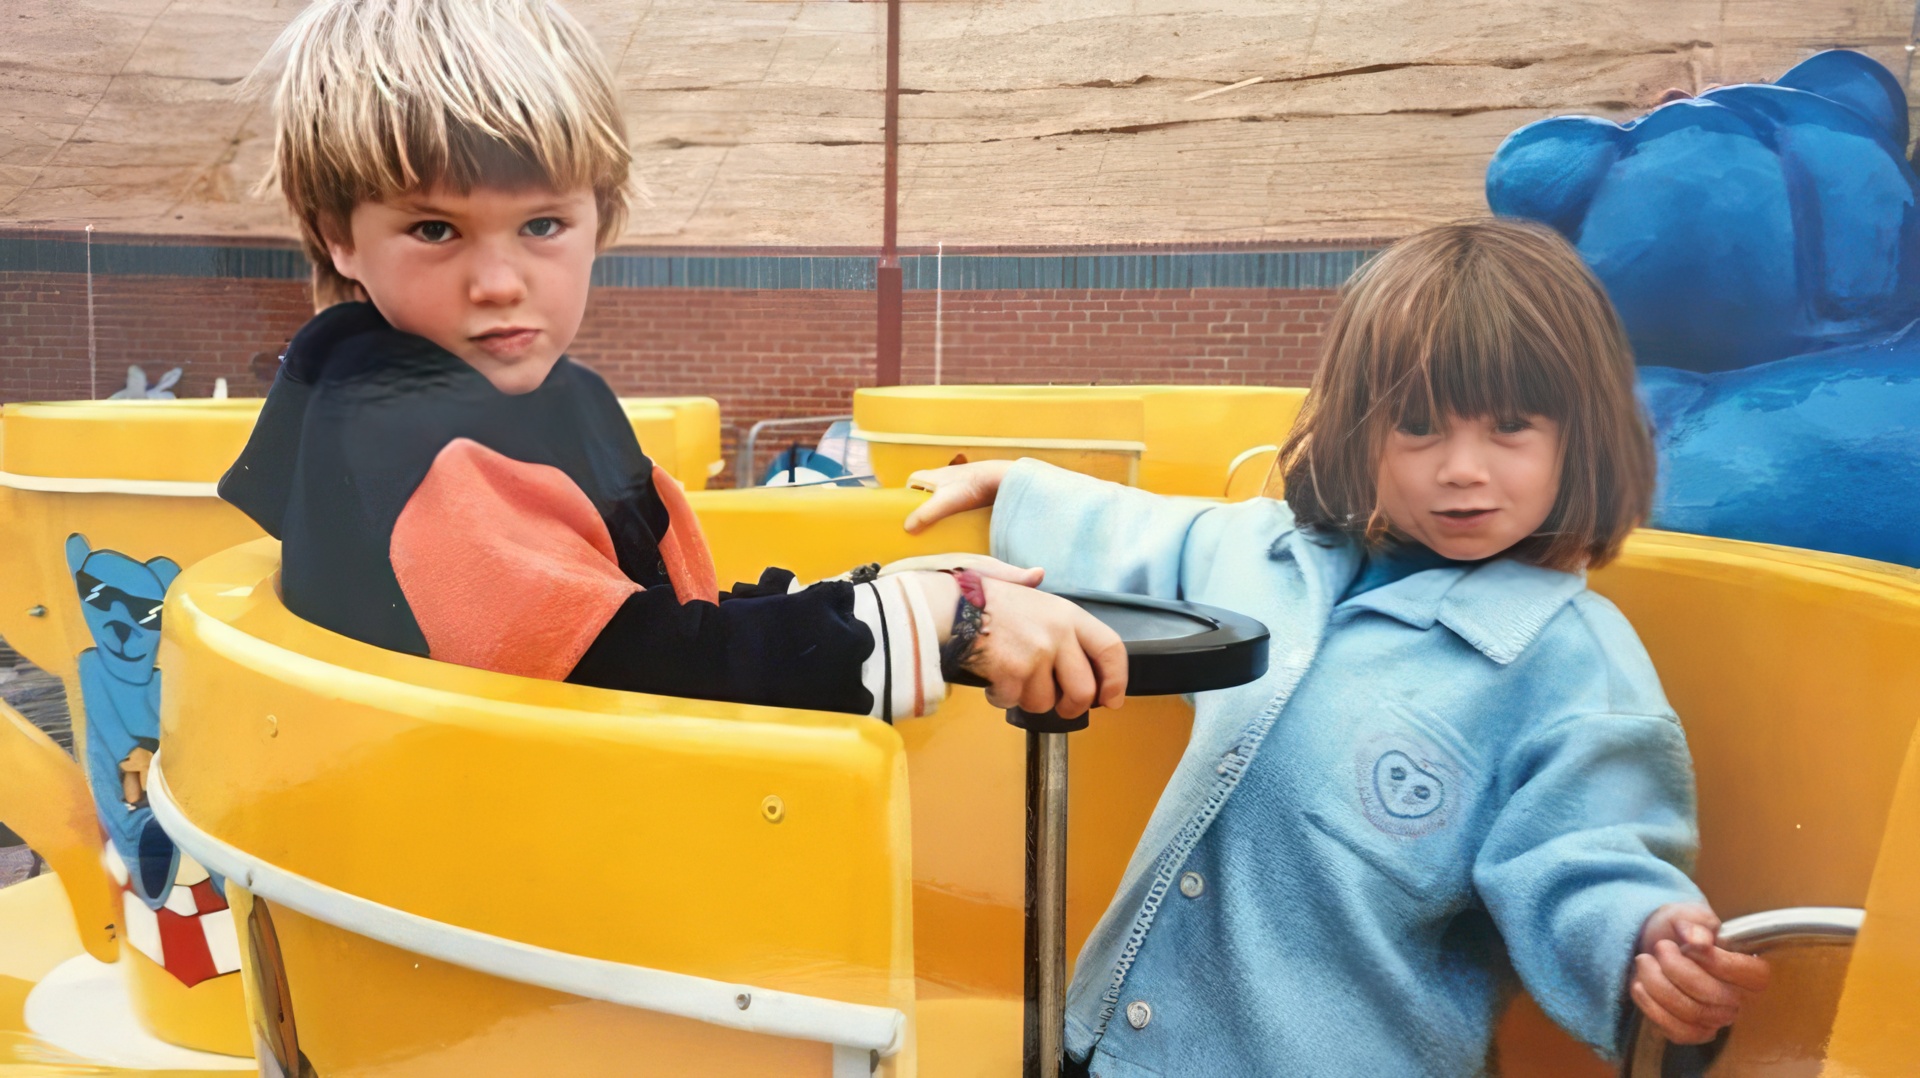 Young Bonnie Wright with her brother